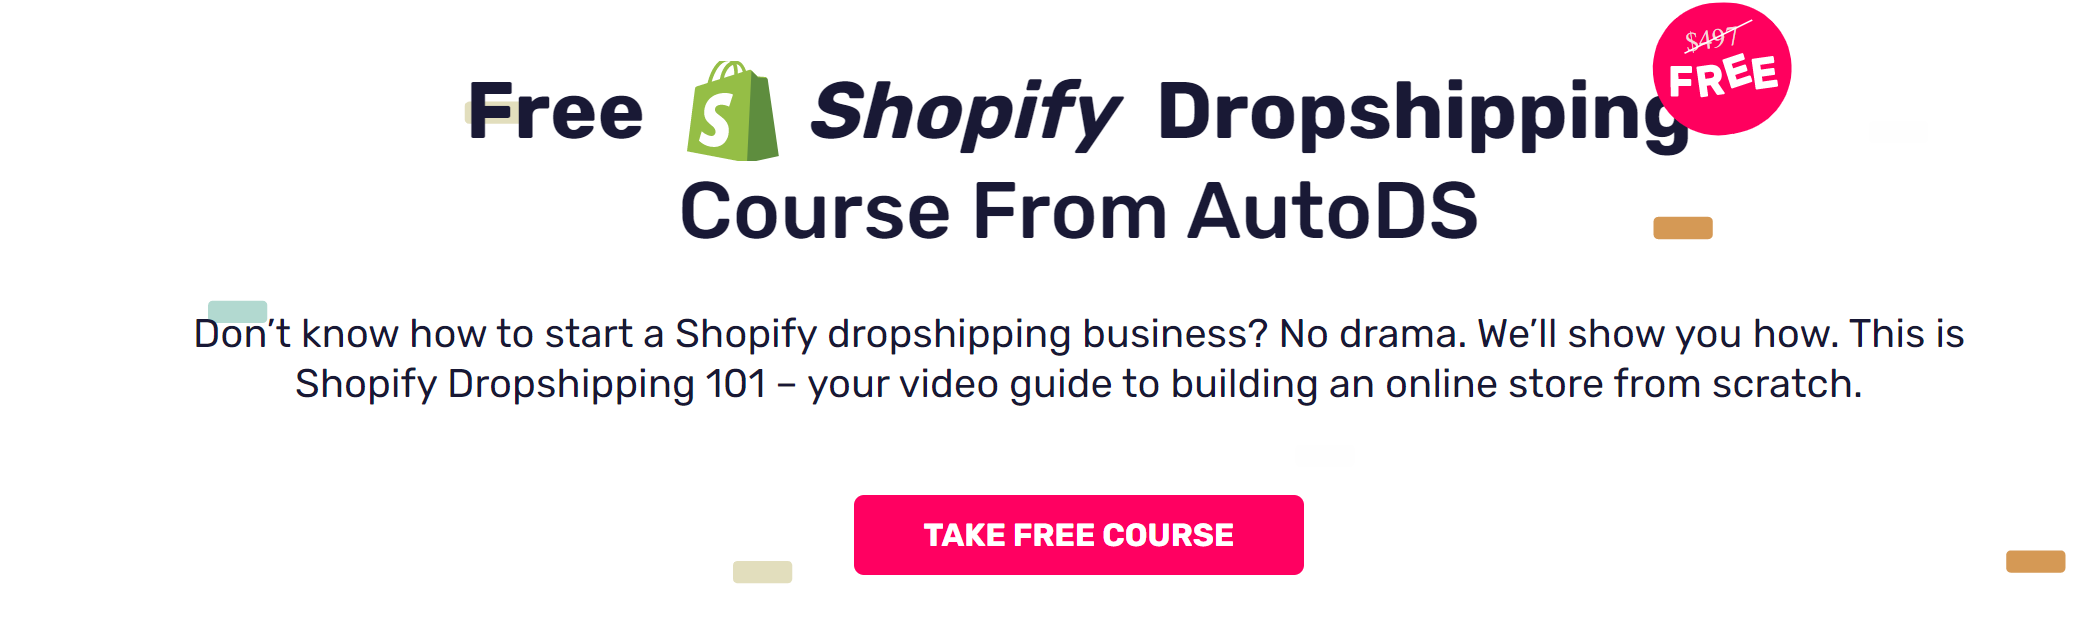 Free Shopify Dropshipping Course